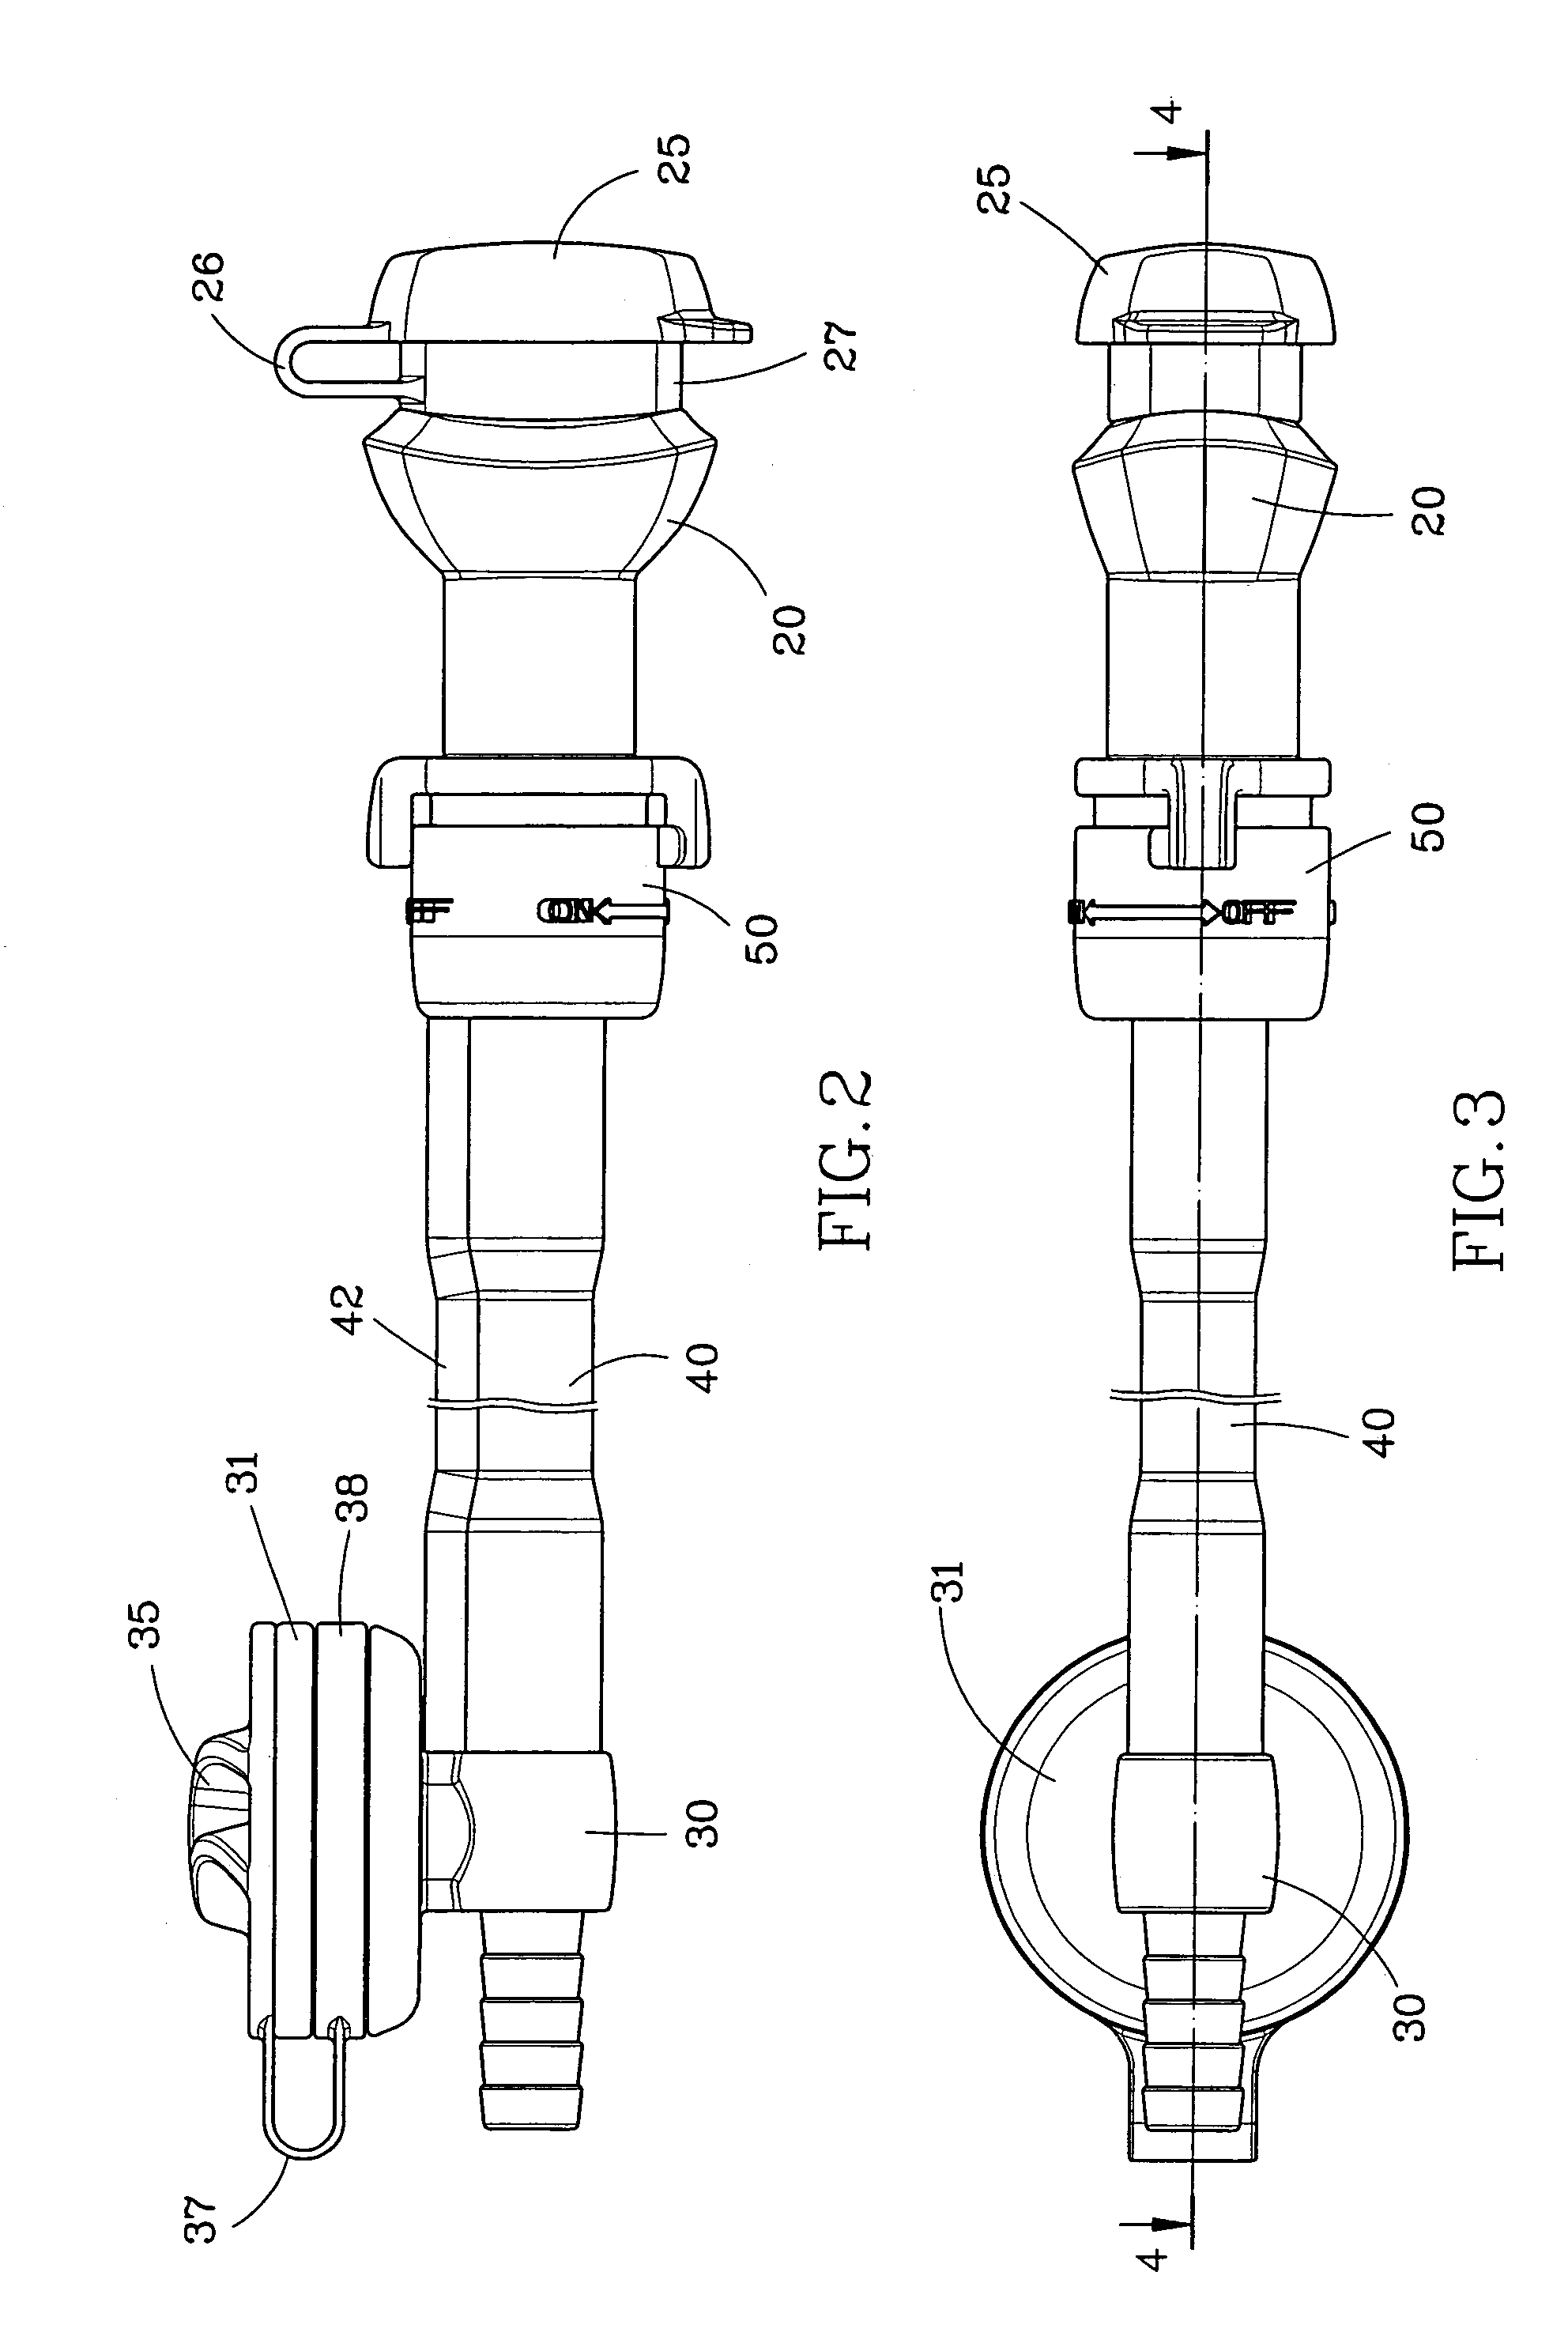 Mouthpiece structure of water bag